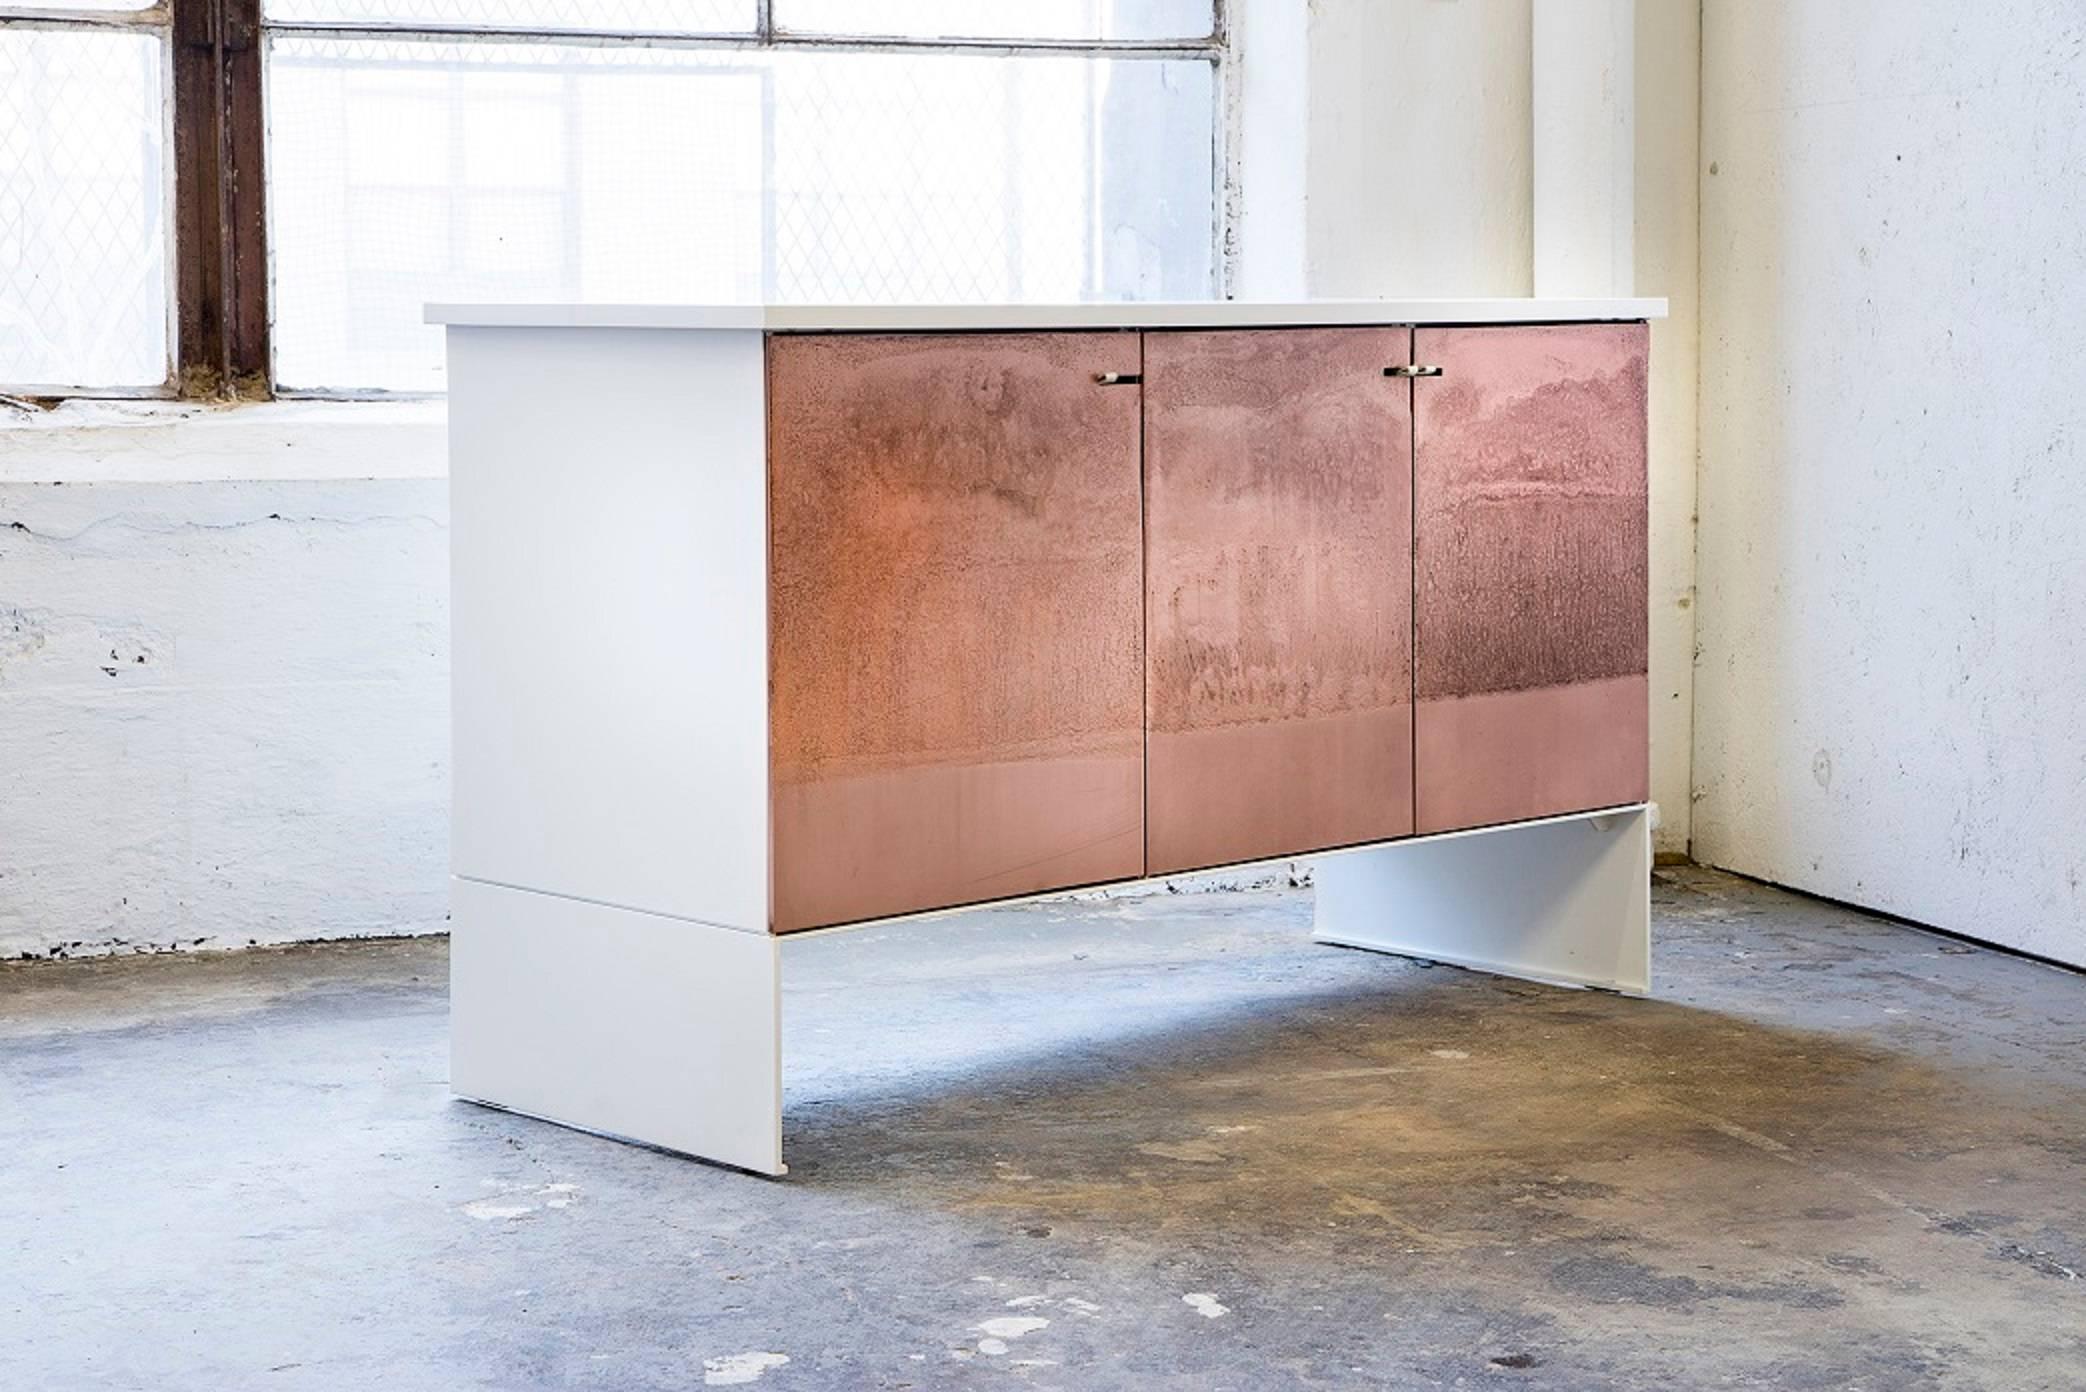 The etch credenza contrasts a rich etched copper texture on the doors with a minimal steel body. The organic texture sets off the clean lines of the frame. The doors swing on custom concealed pivot hinges.